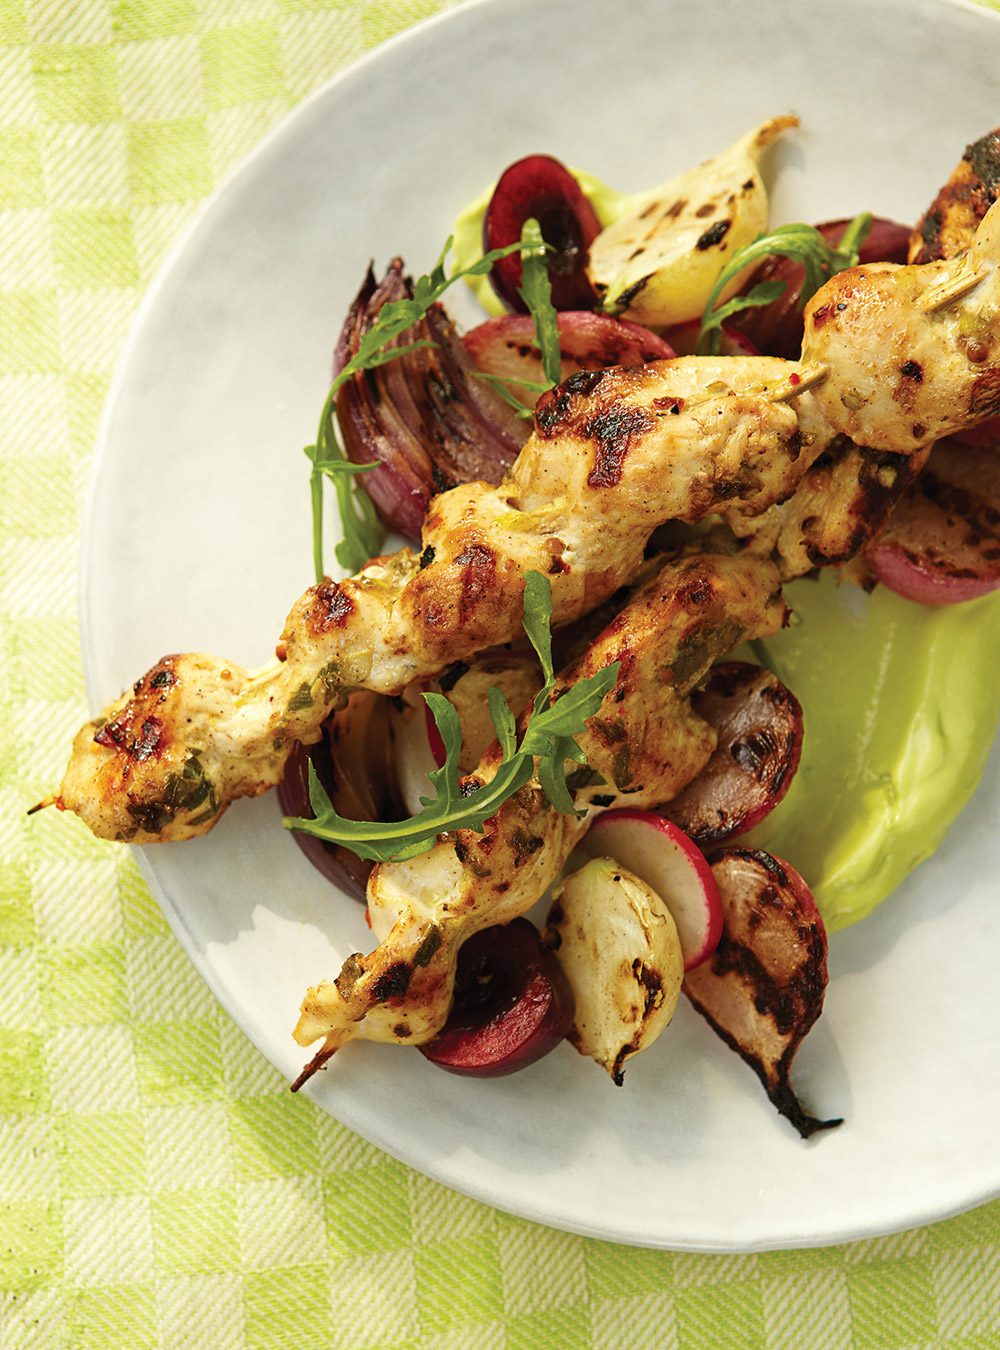 Spiced Chicken Skewers on Avocado Purée